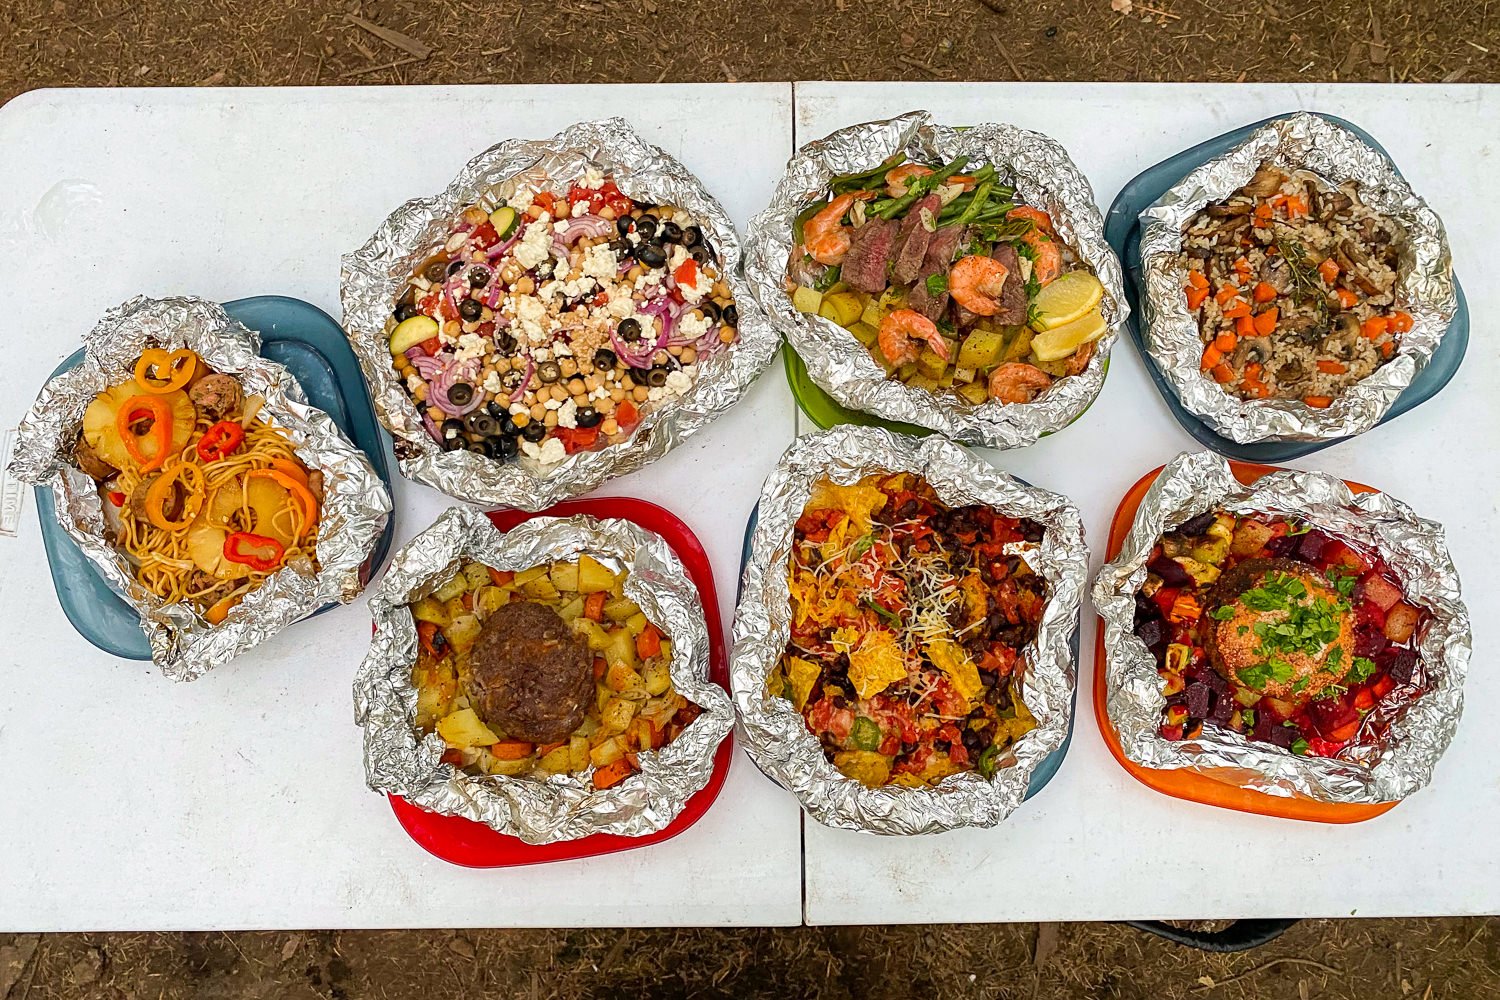 Top-down view of seven different cooked foil packet meals on a camping table